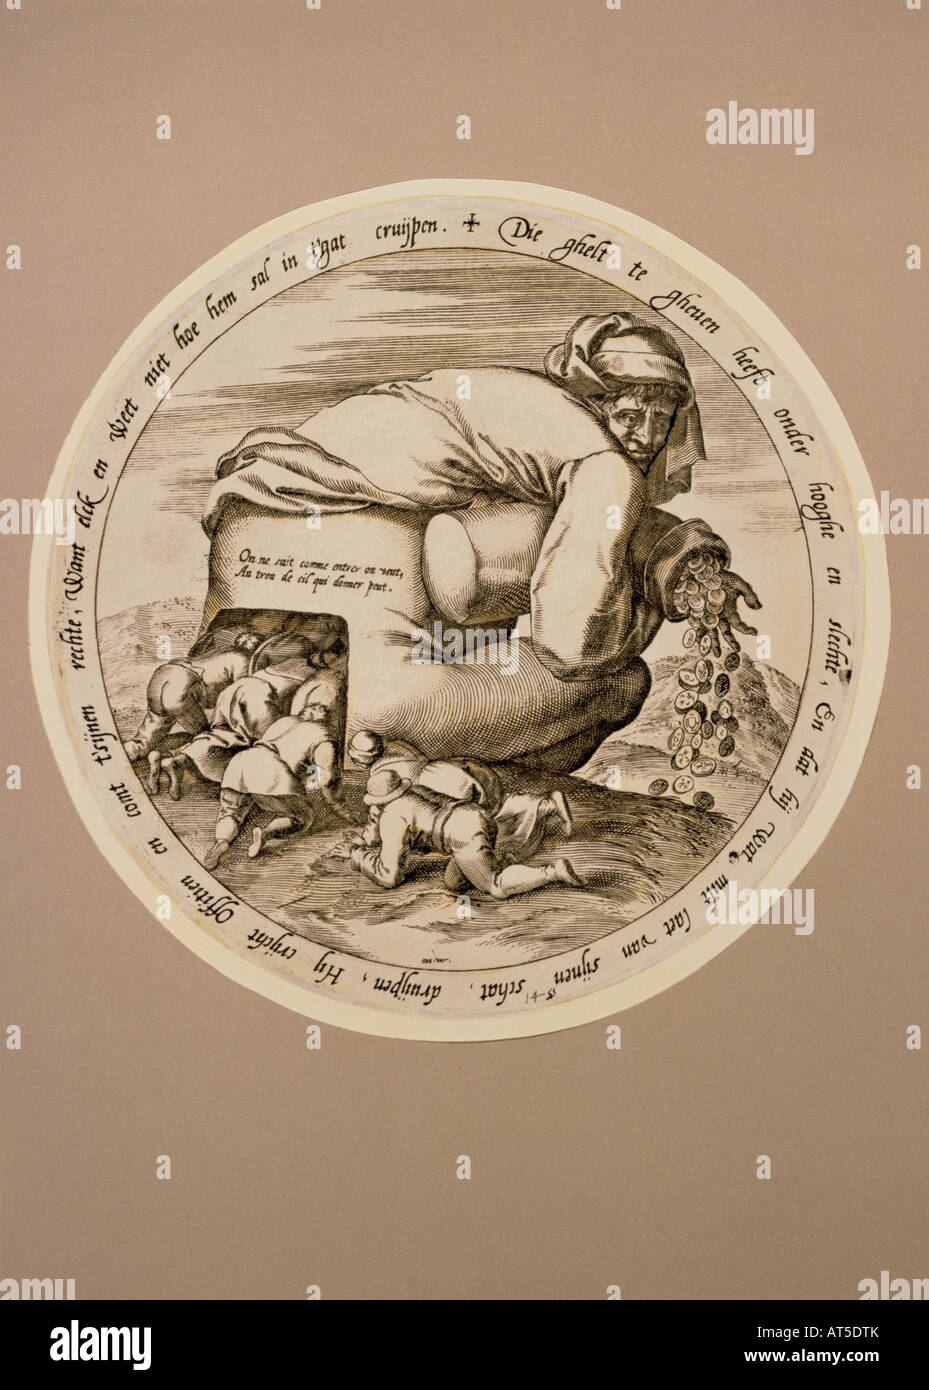 fine arts, Bruegel, Pieter the Elder (circa 1525 - 1569), copper engraving based on Brueghel, round format, sayings, diameter 18 cm, private collection, Artist's Copyright has not to be cleared Stock Photo